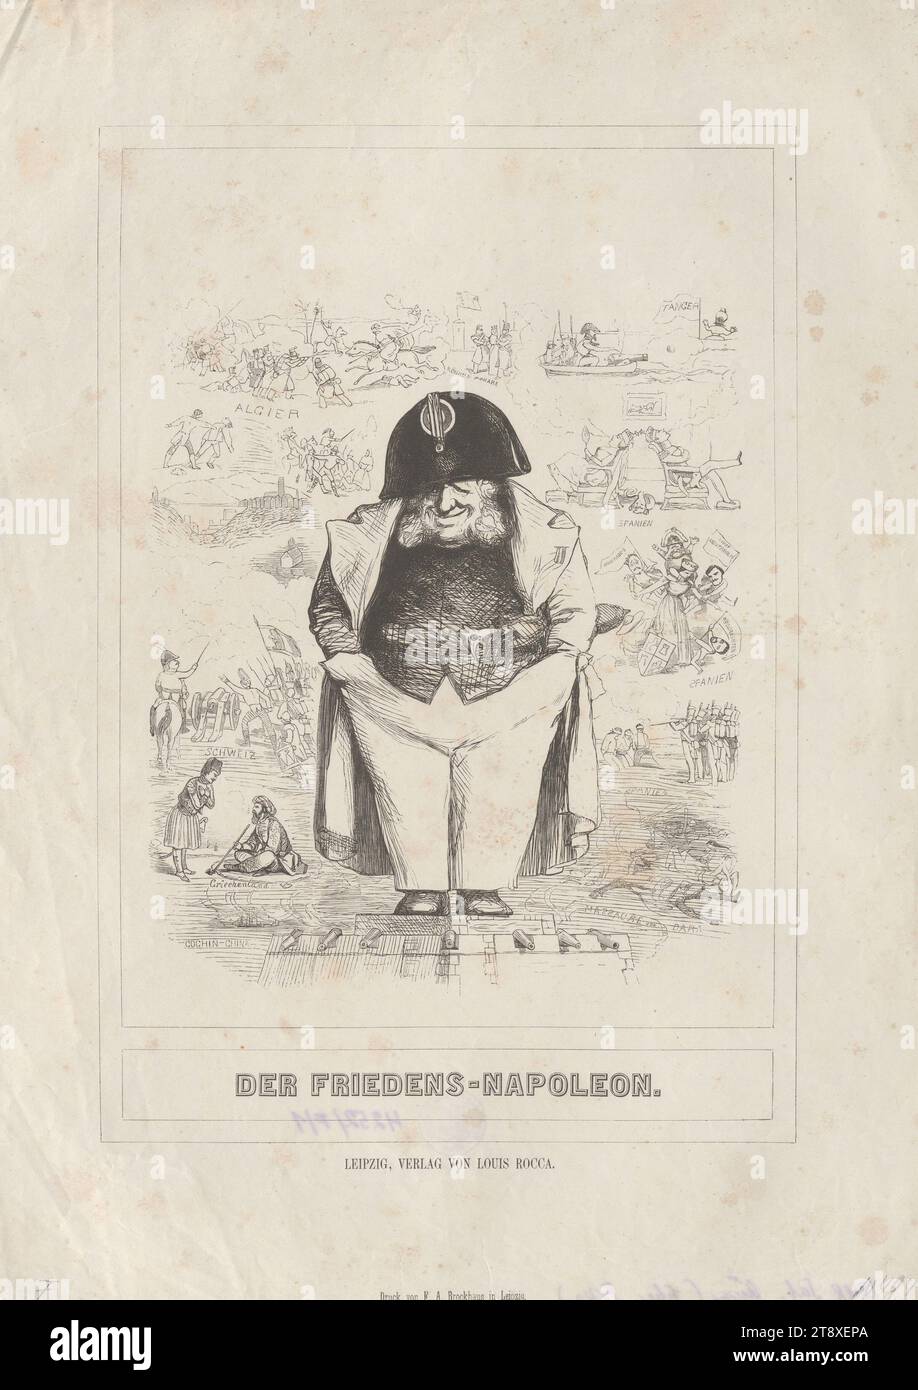 DER FRIEDENS-NAPOLEON' (Caricature on the French King Louis-Philippe, 1848), F. A. Brockhaus, Printer, Louis Rocca, publisher, 1848, paper, pen and ink-manner lithograph, height 39, 2 cm, width 28, 1 cm, Caricature, Satire, Revolutions of 1848, 1849, king; emperor, ruler, sovereign, The Vienna Collection Stock Photo